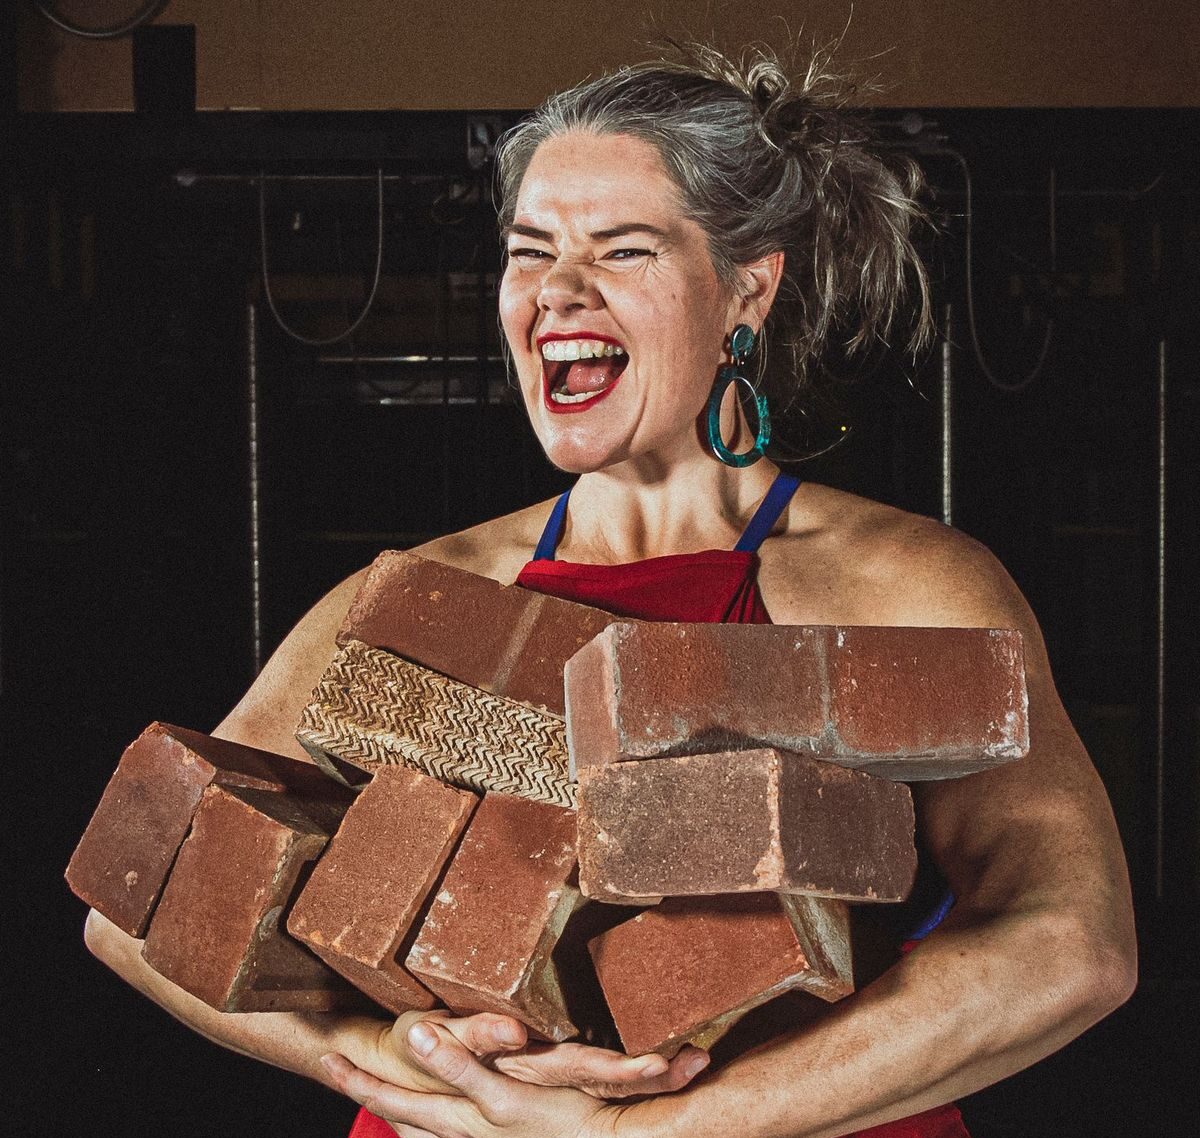 Charmaine holds a pile of bricks in a promo image for Strong Enough